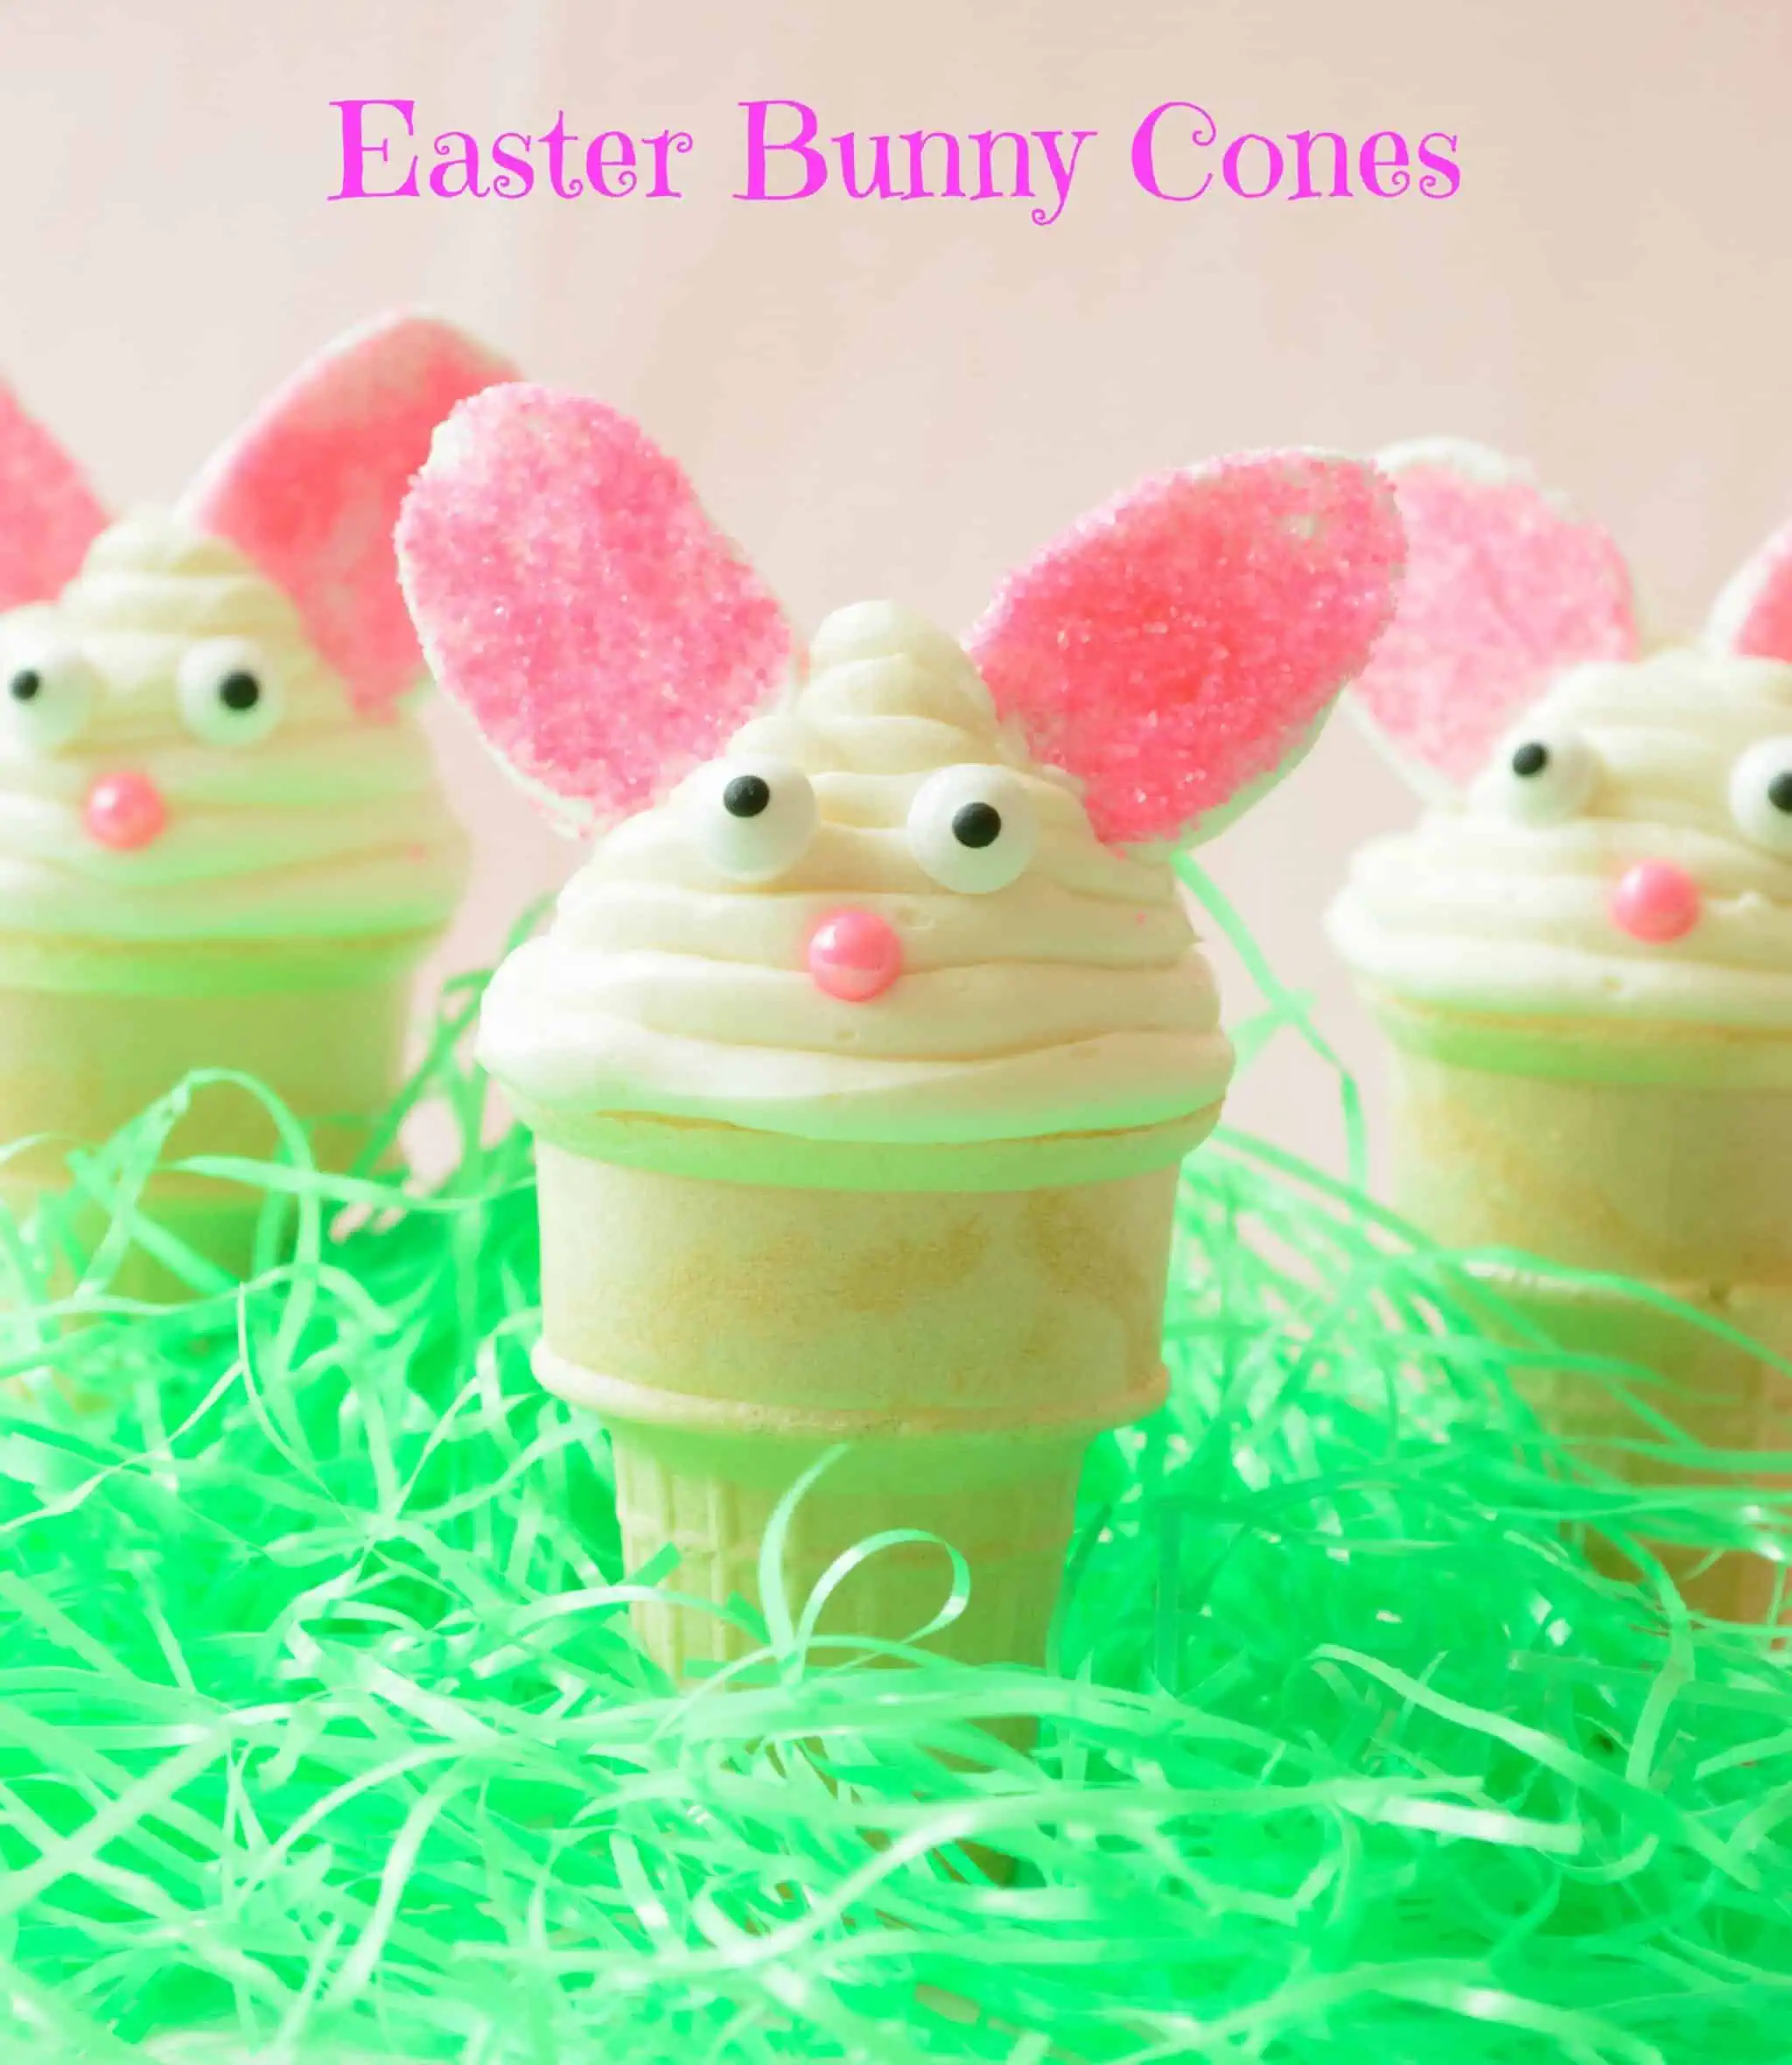 Easter Bunny Cones scaled